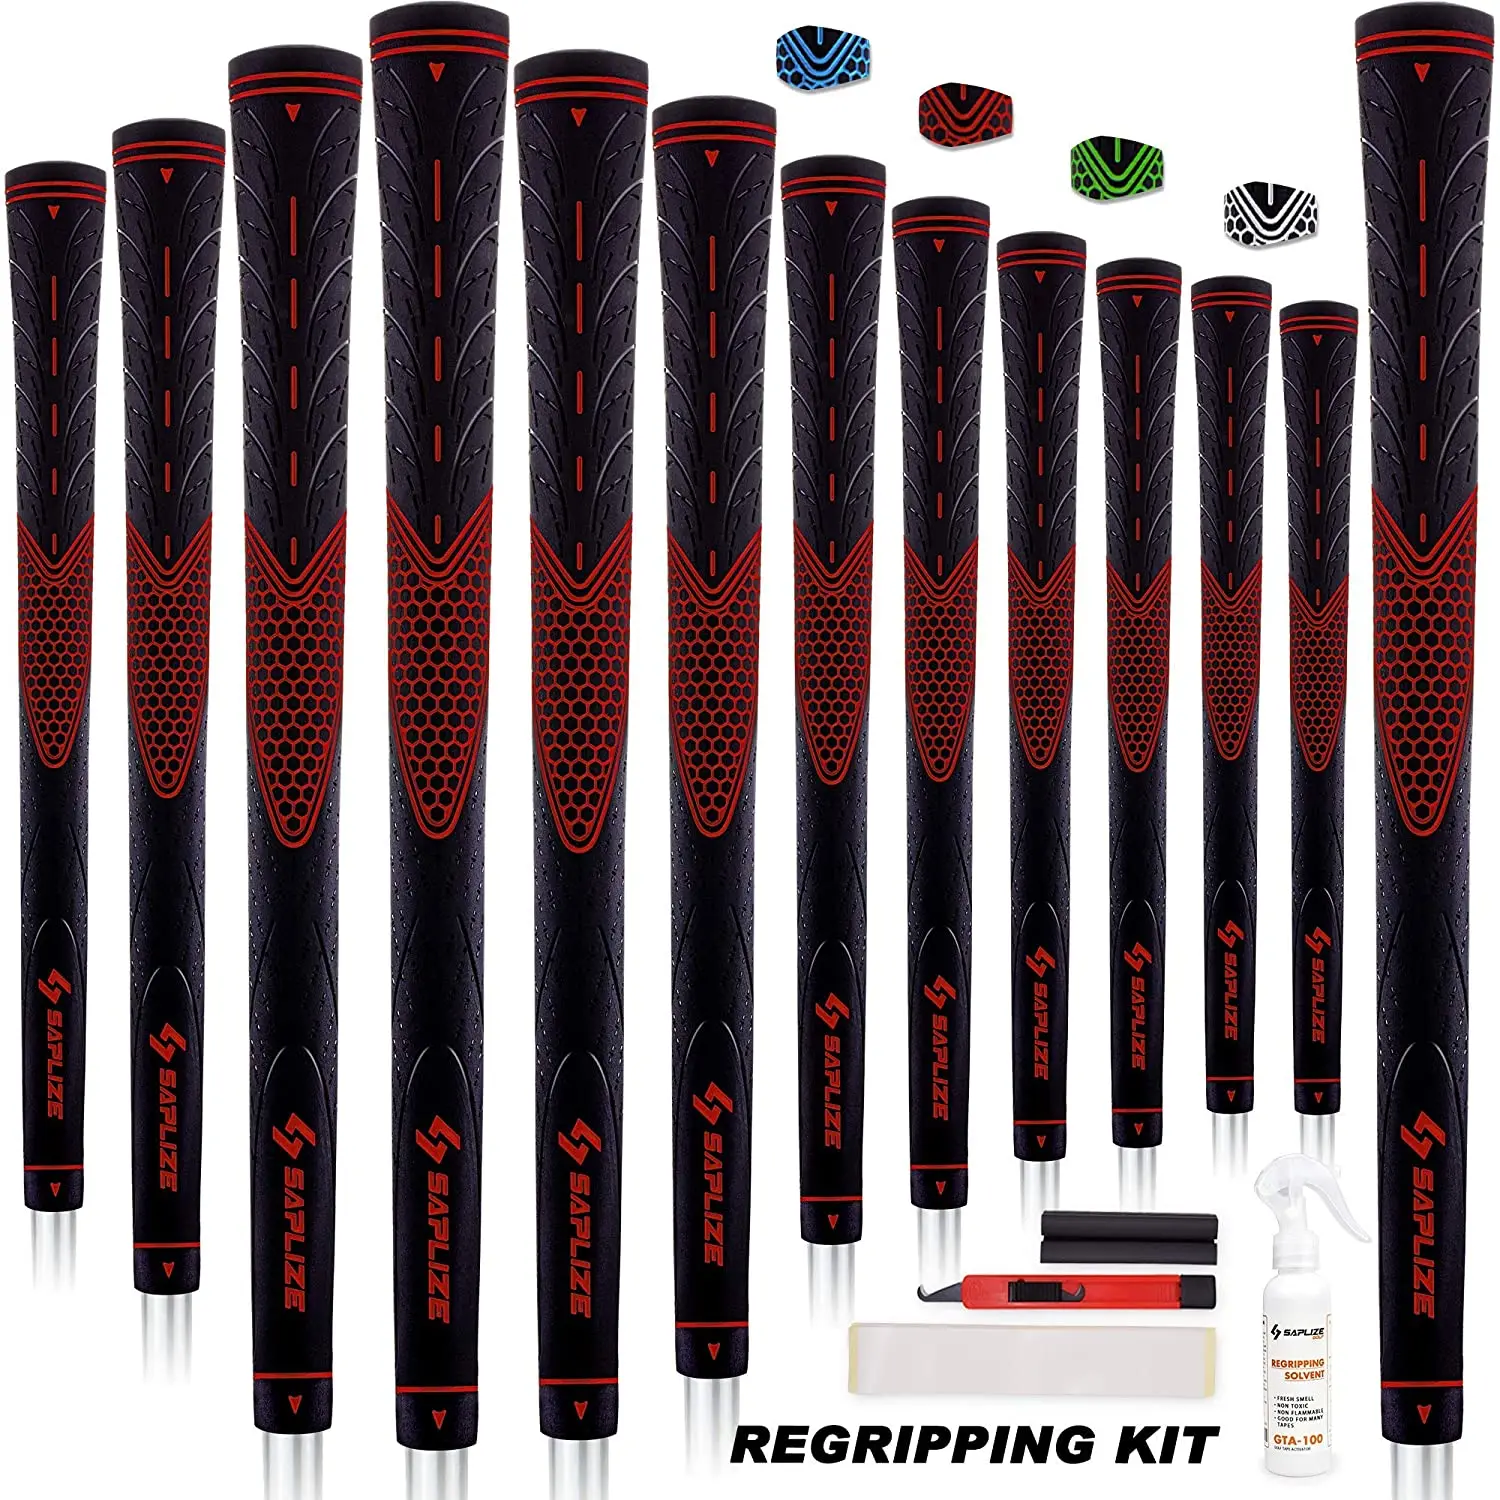 SAPLIZE Golf Grips Standard 13 Grips with 15 Tapes or 13 Grips with Full Regripping Kit Anti-Slip Rubber Golf Club Grips